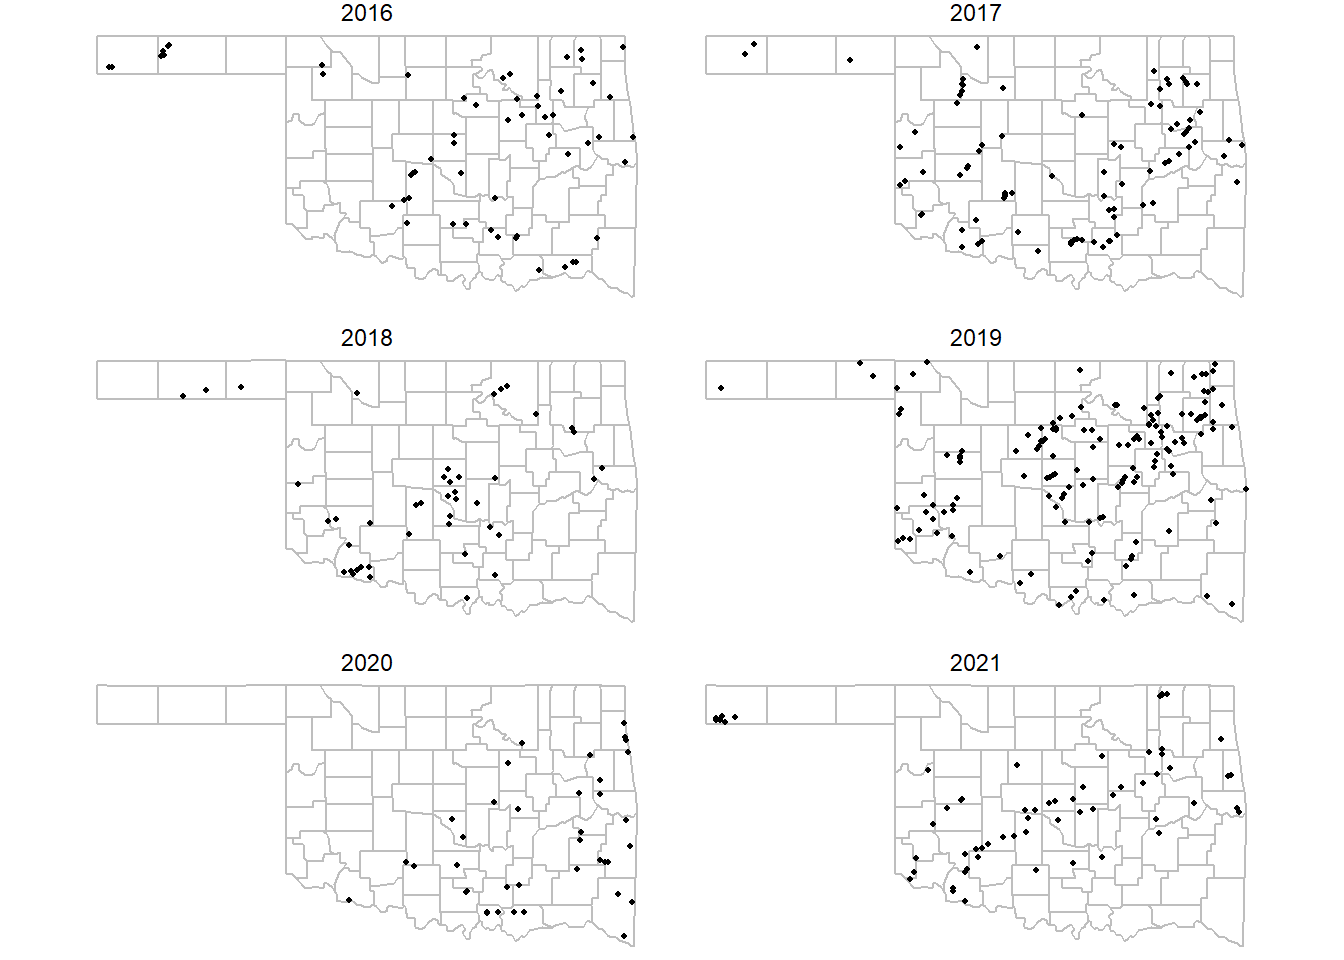 Initiation points of tornadoes in Oklahoma from 2016-2021 with years mapped as separate facets.